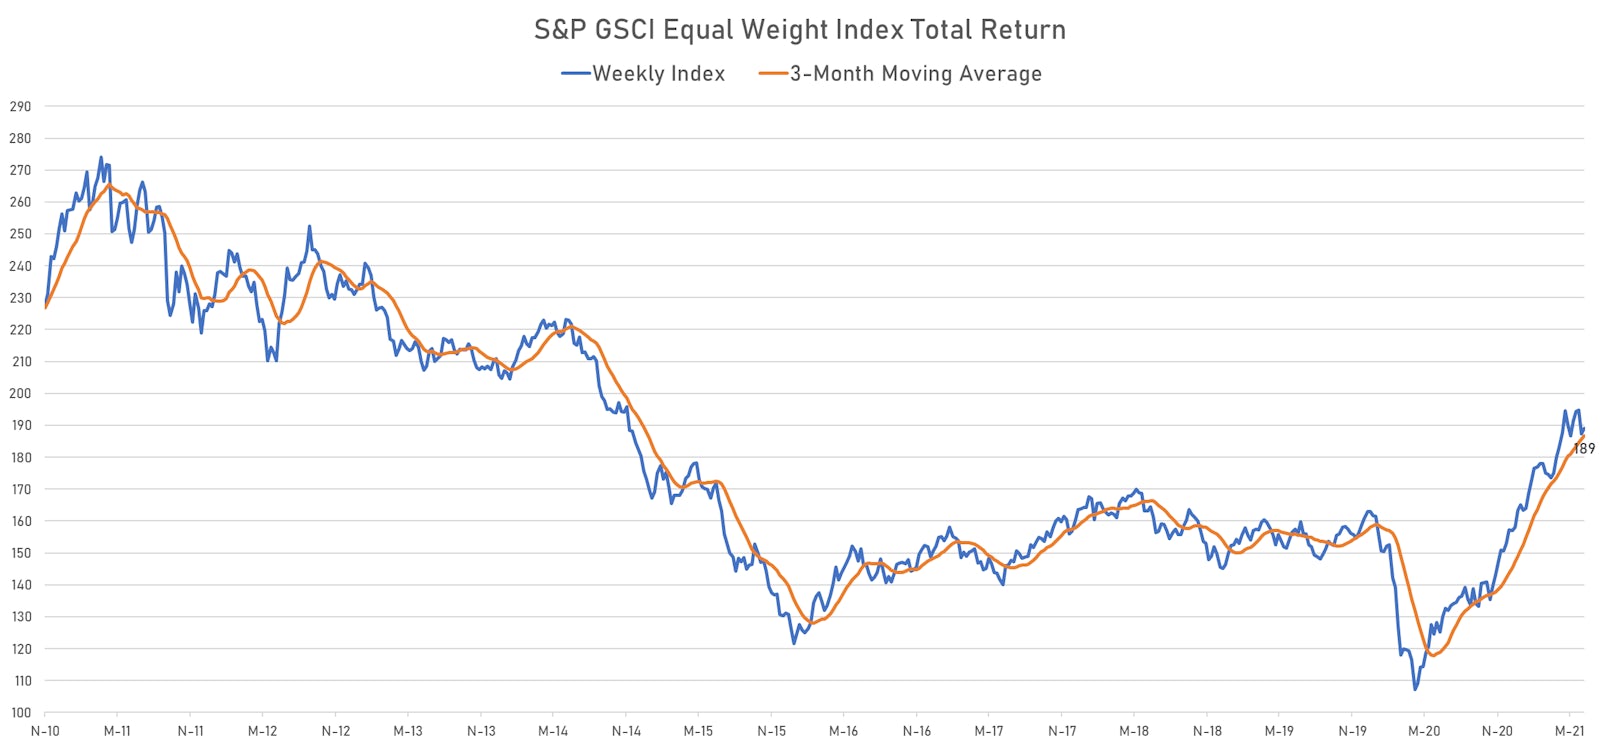 S&P GSCI Equal Weight Index Bounced Off 3-month moving average | Sources: ϕpost, Refinitiv data